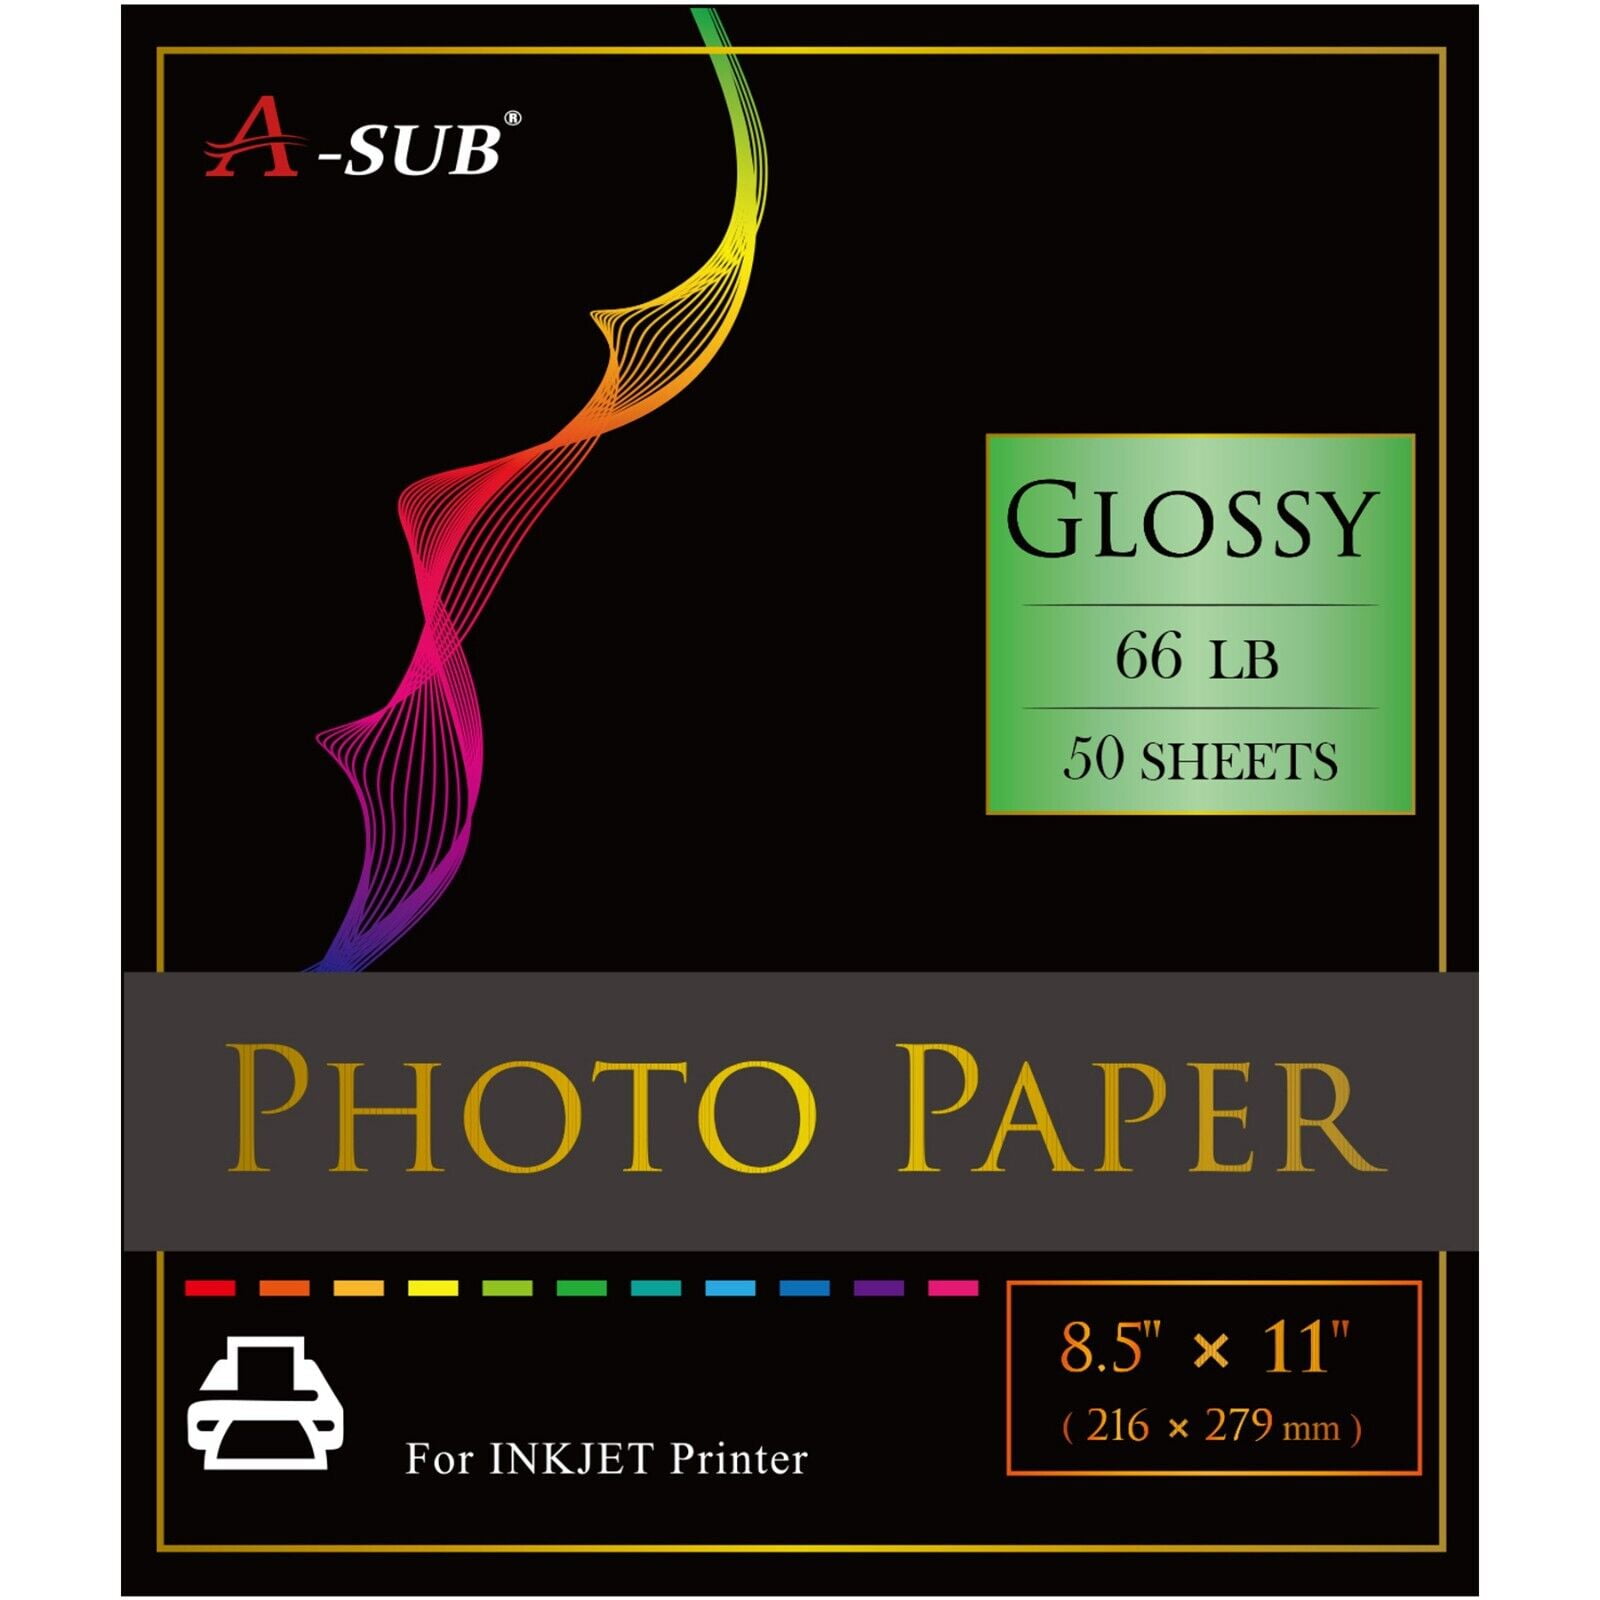 A-SUB Premium Photo Paper Glossy 13x19 Inch 66lb Heavyweight 250gsm  Waterproof for Inkjet Printers 50 Sheets 